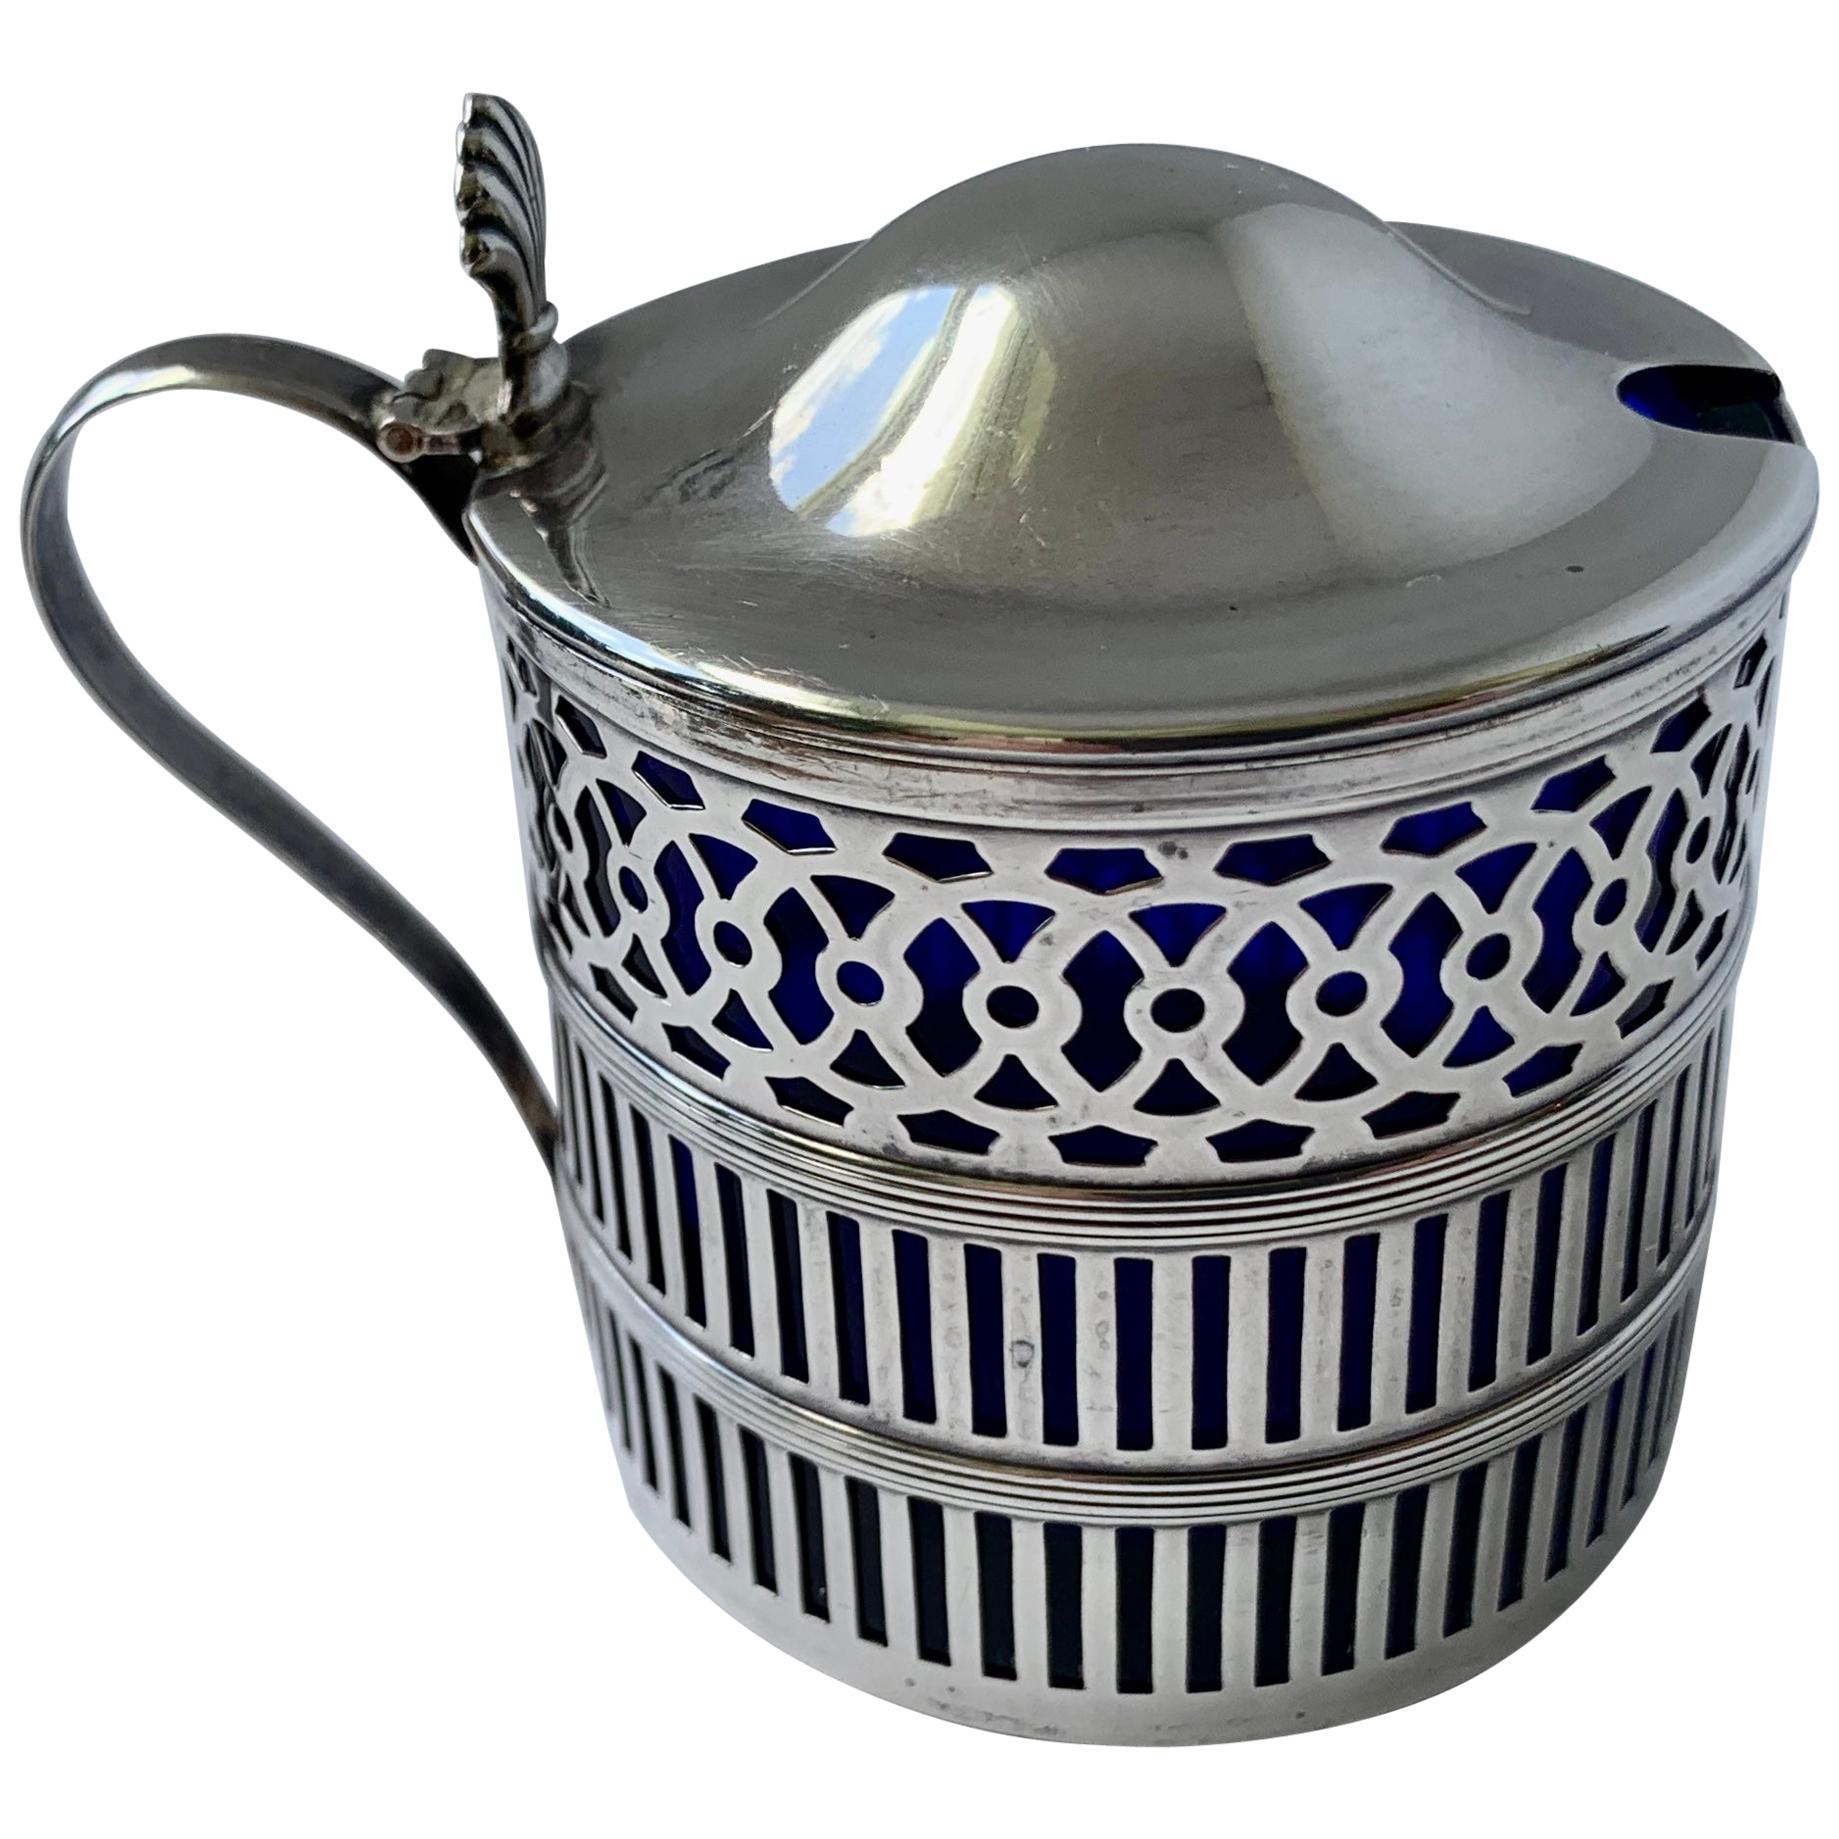  Sterling Silver Mustard Pot with a Cobalt Blue Glass Liner by  Webster Co.